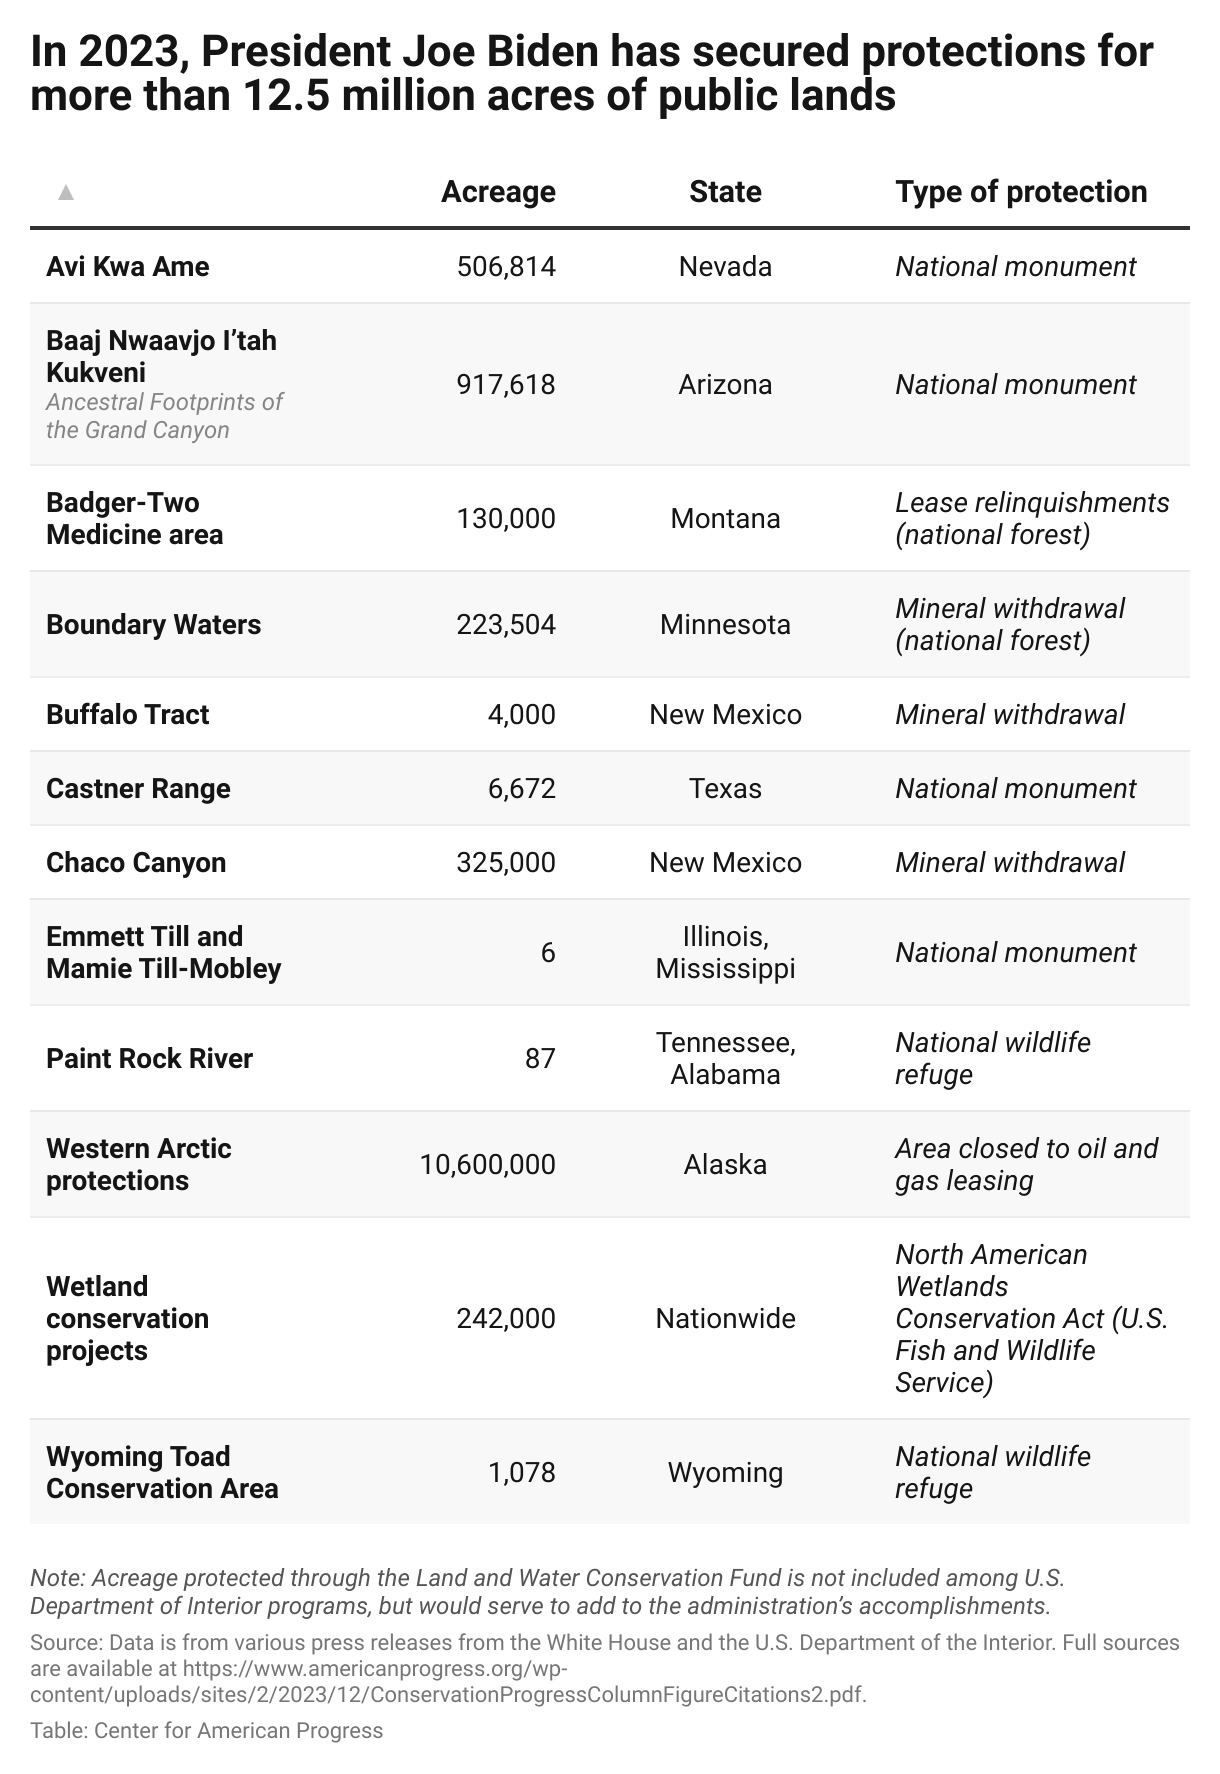 A table showing that types of new public land designations in 2023 include national monuments, wildlife refuges, mineral withdrawals, and more.